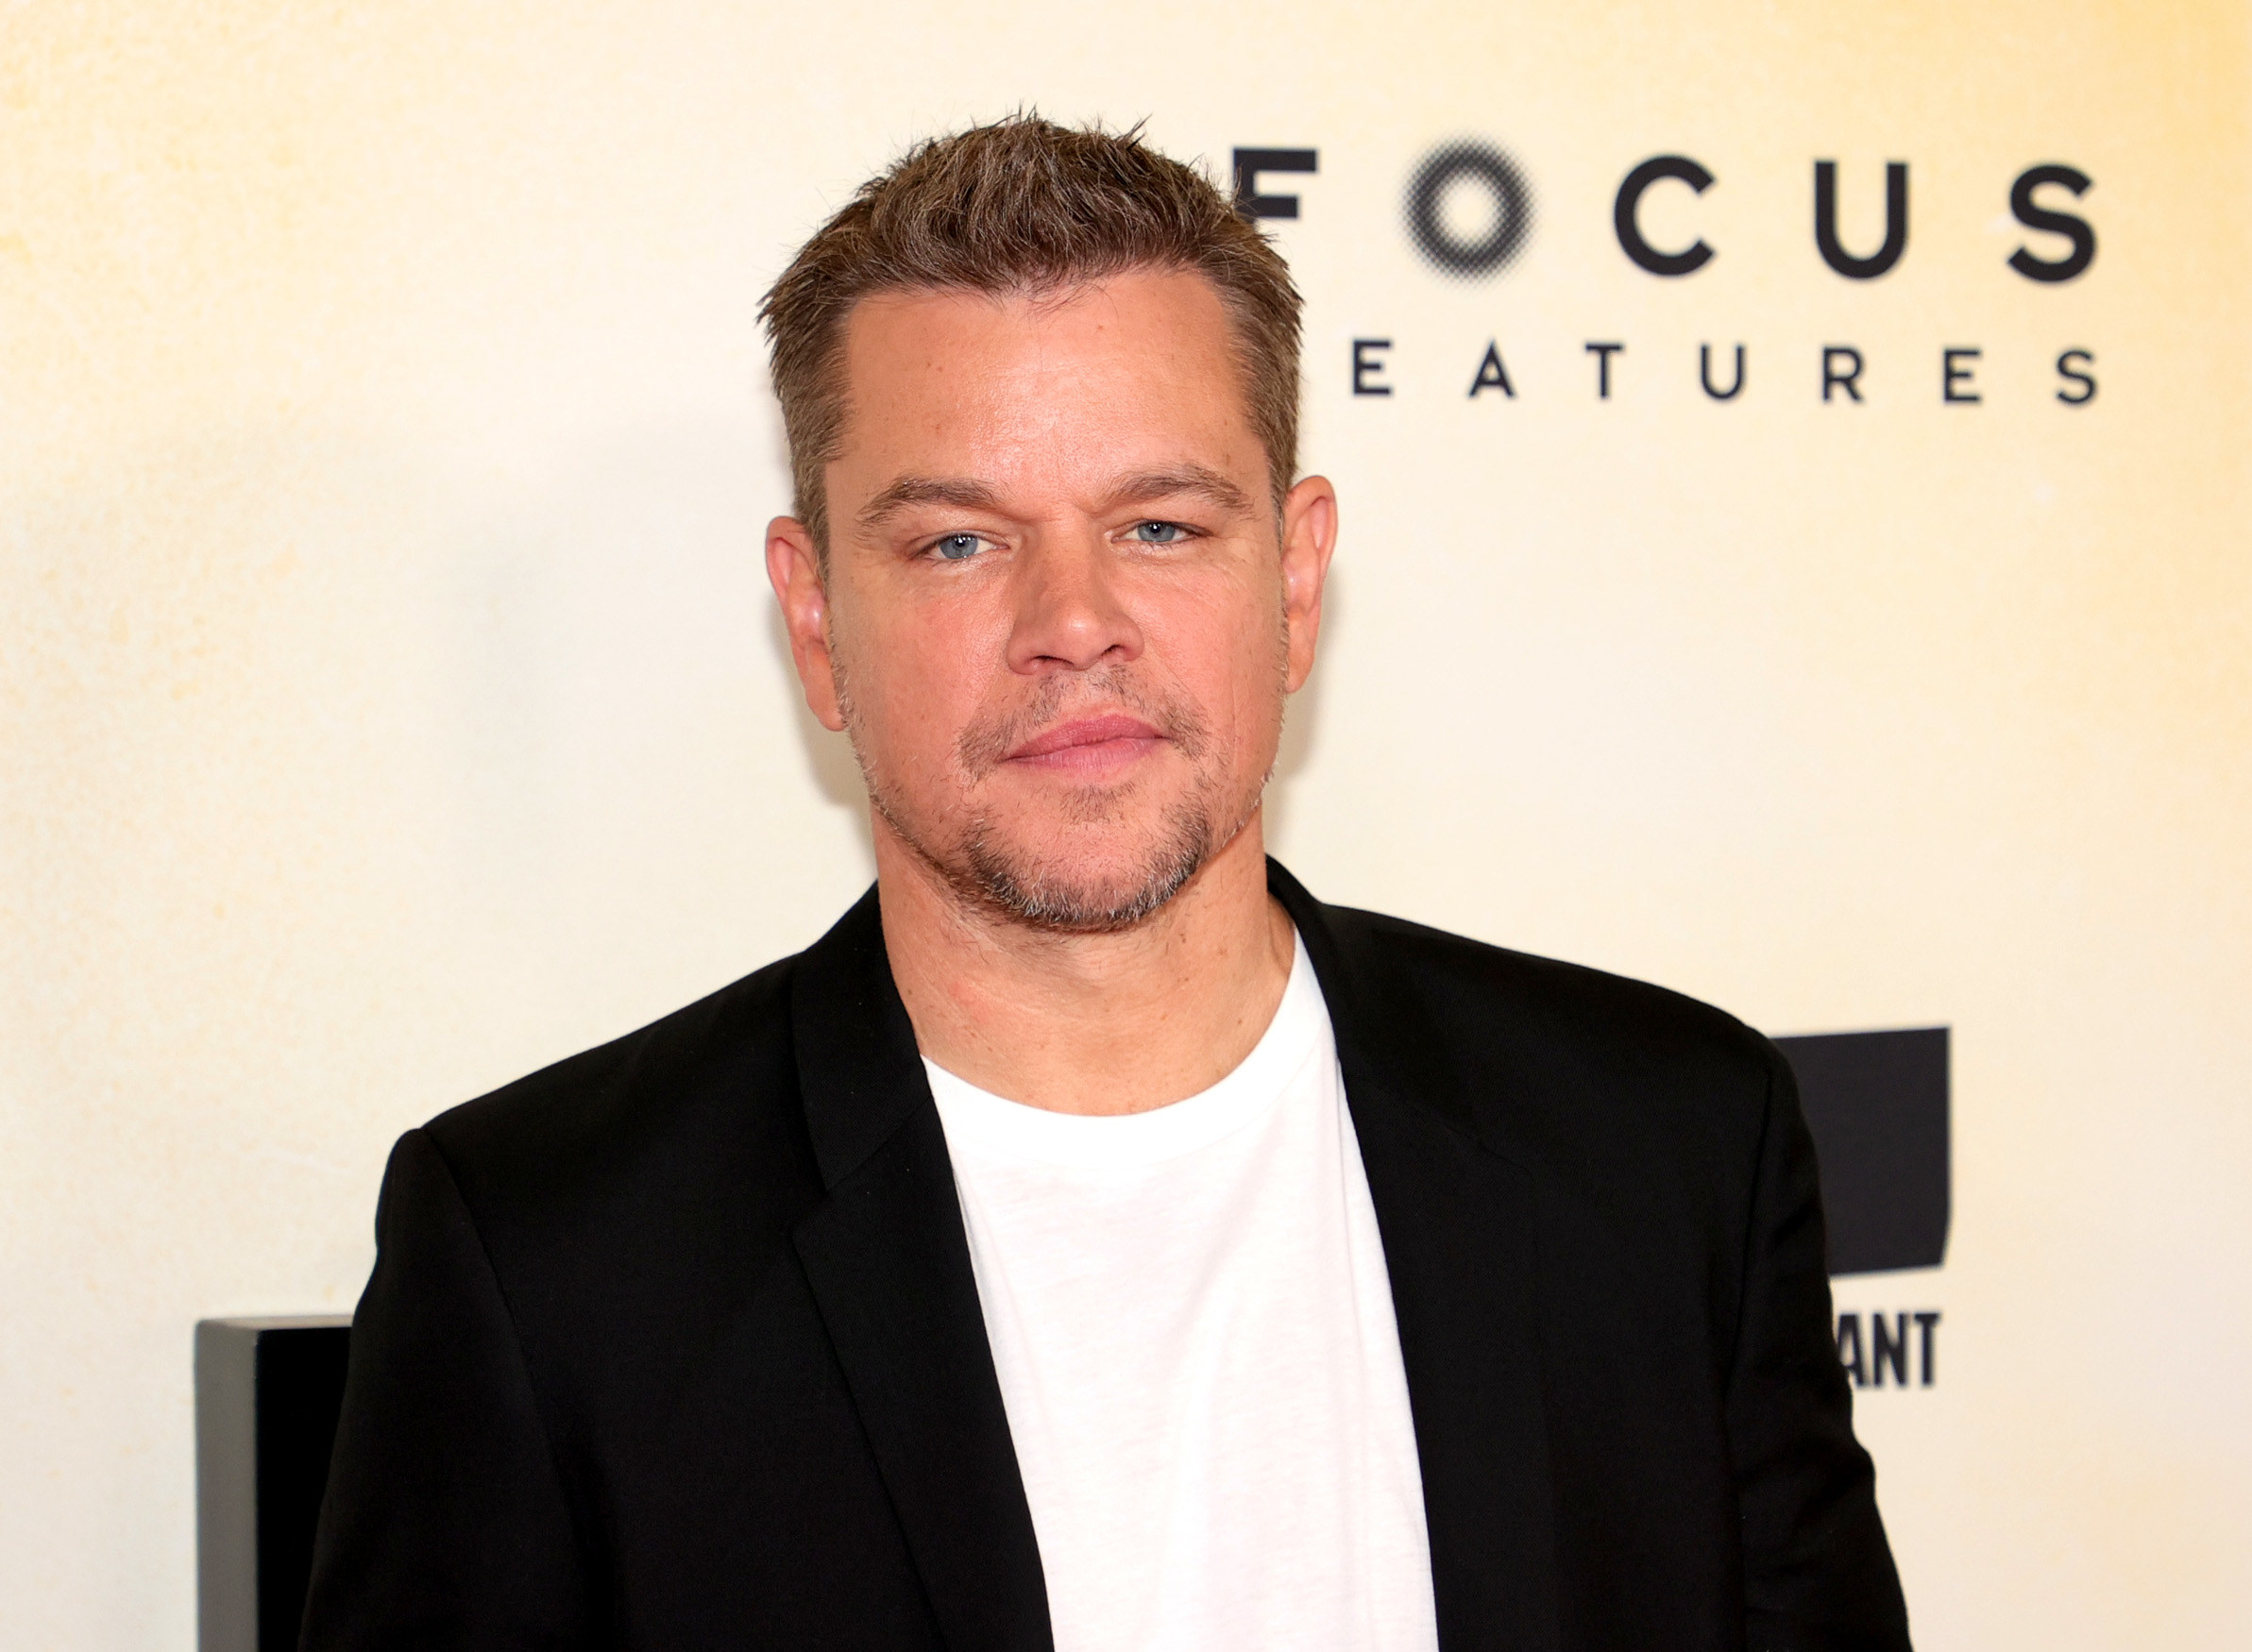 Matt Damon is photographed at a movie premiere